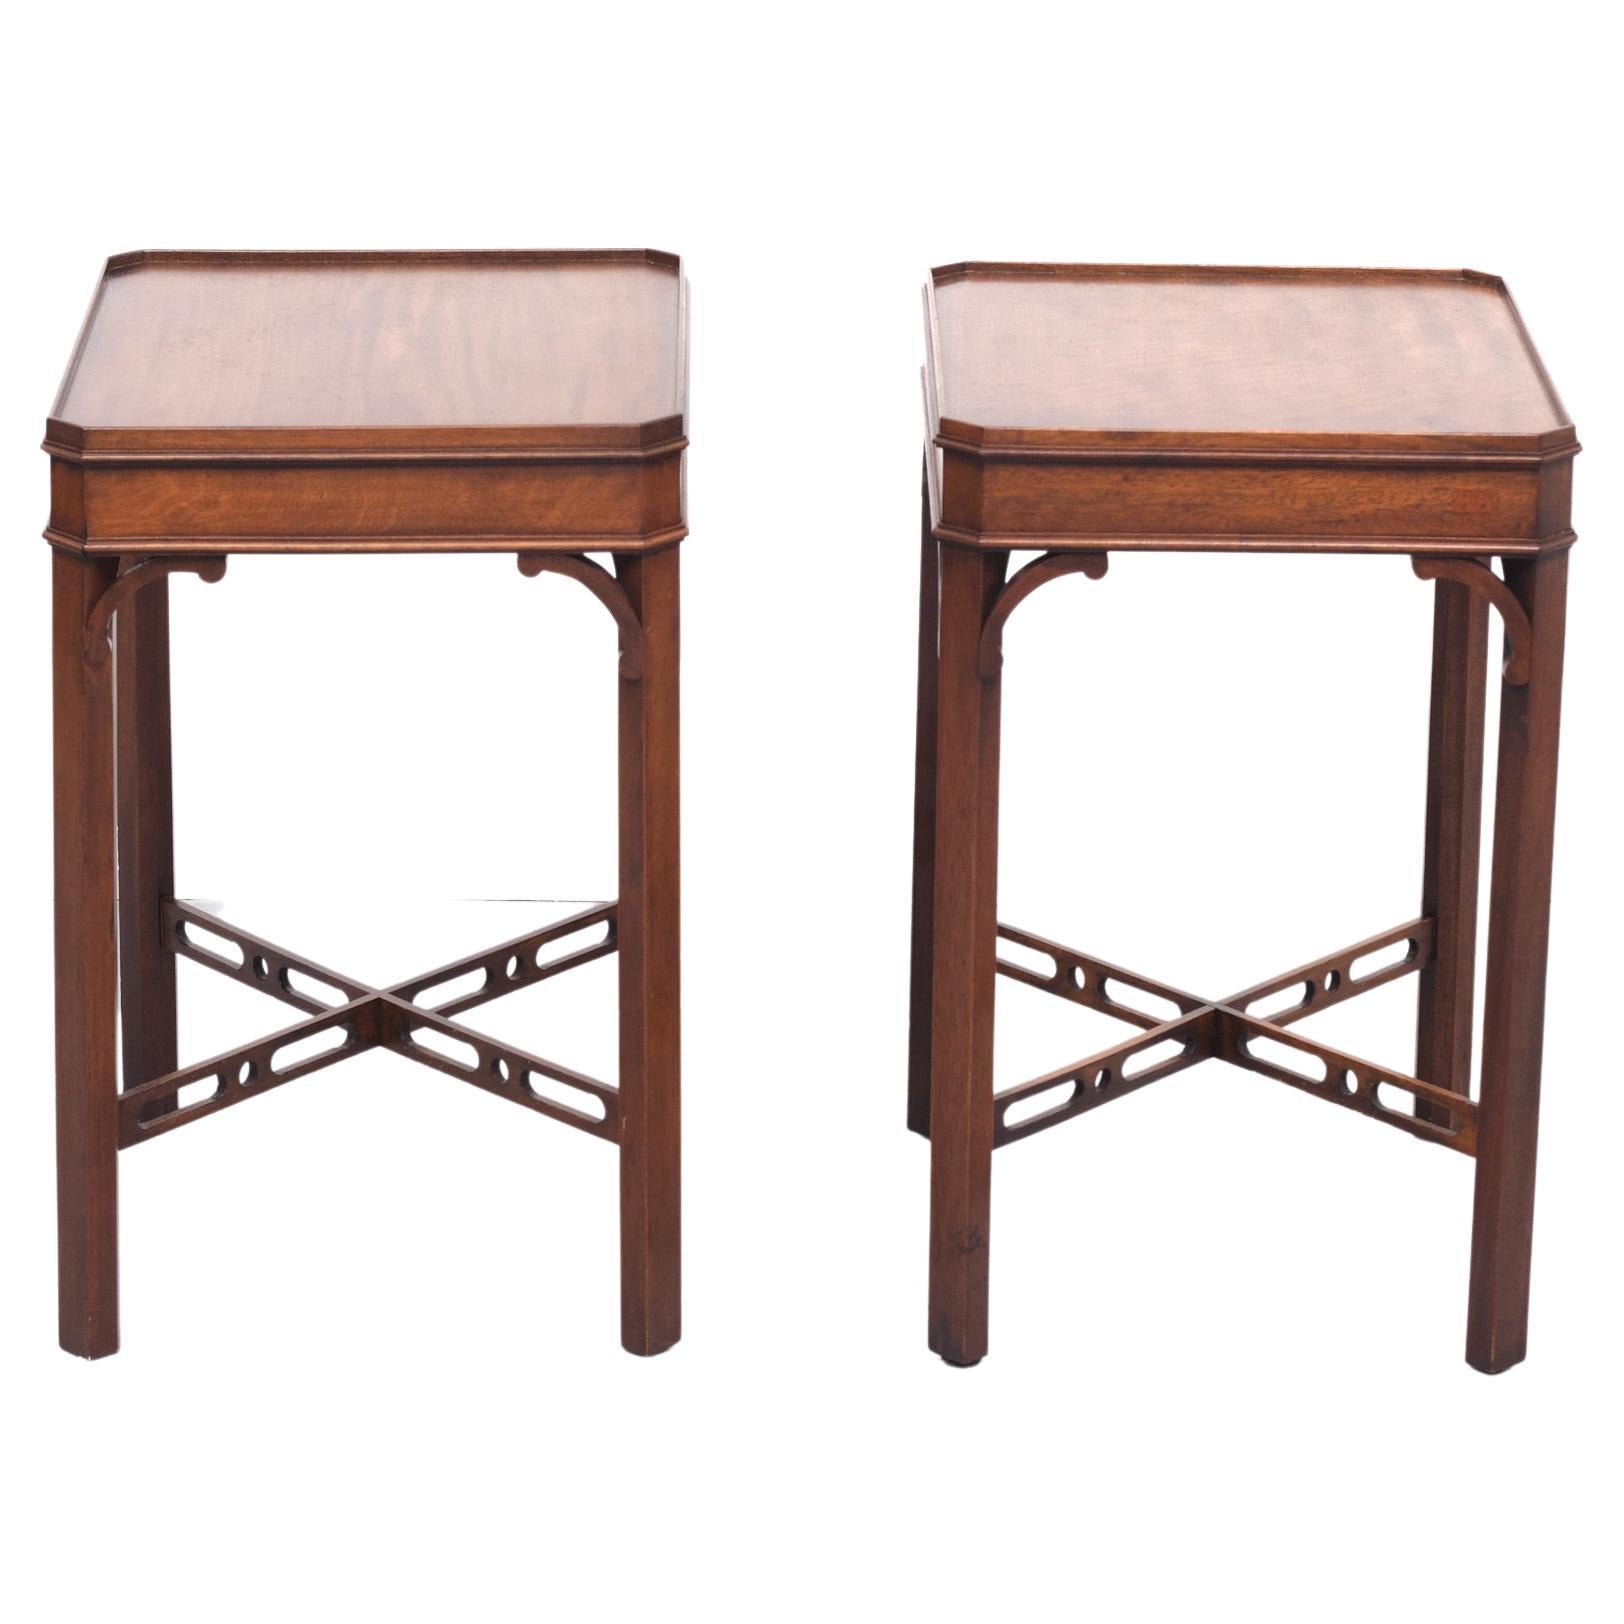 Bevan Funnell  Mahogany Side Tables  Georgian revival    England, 1960s For Sale